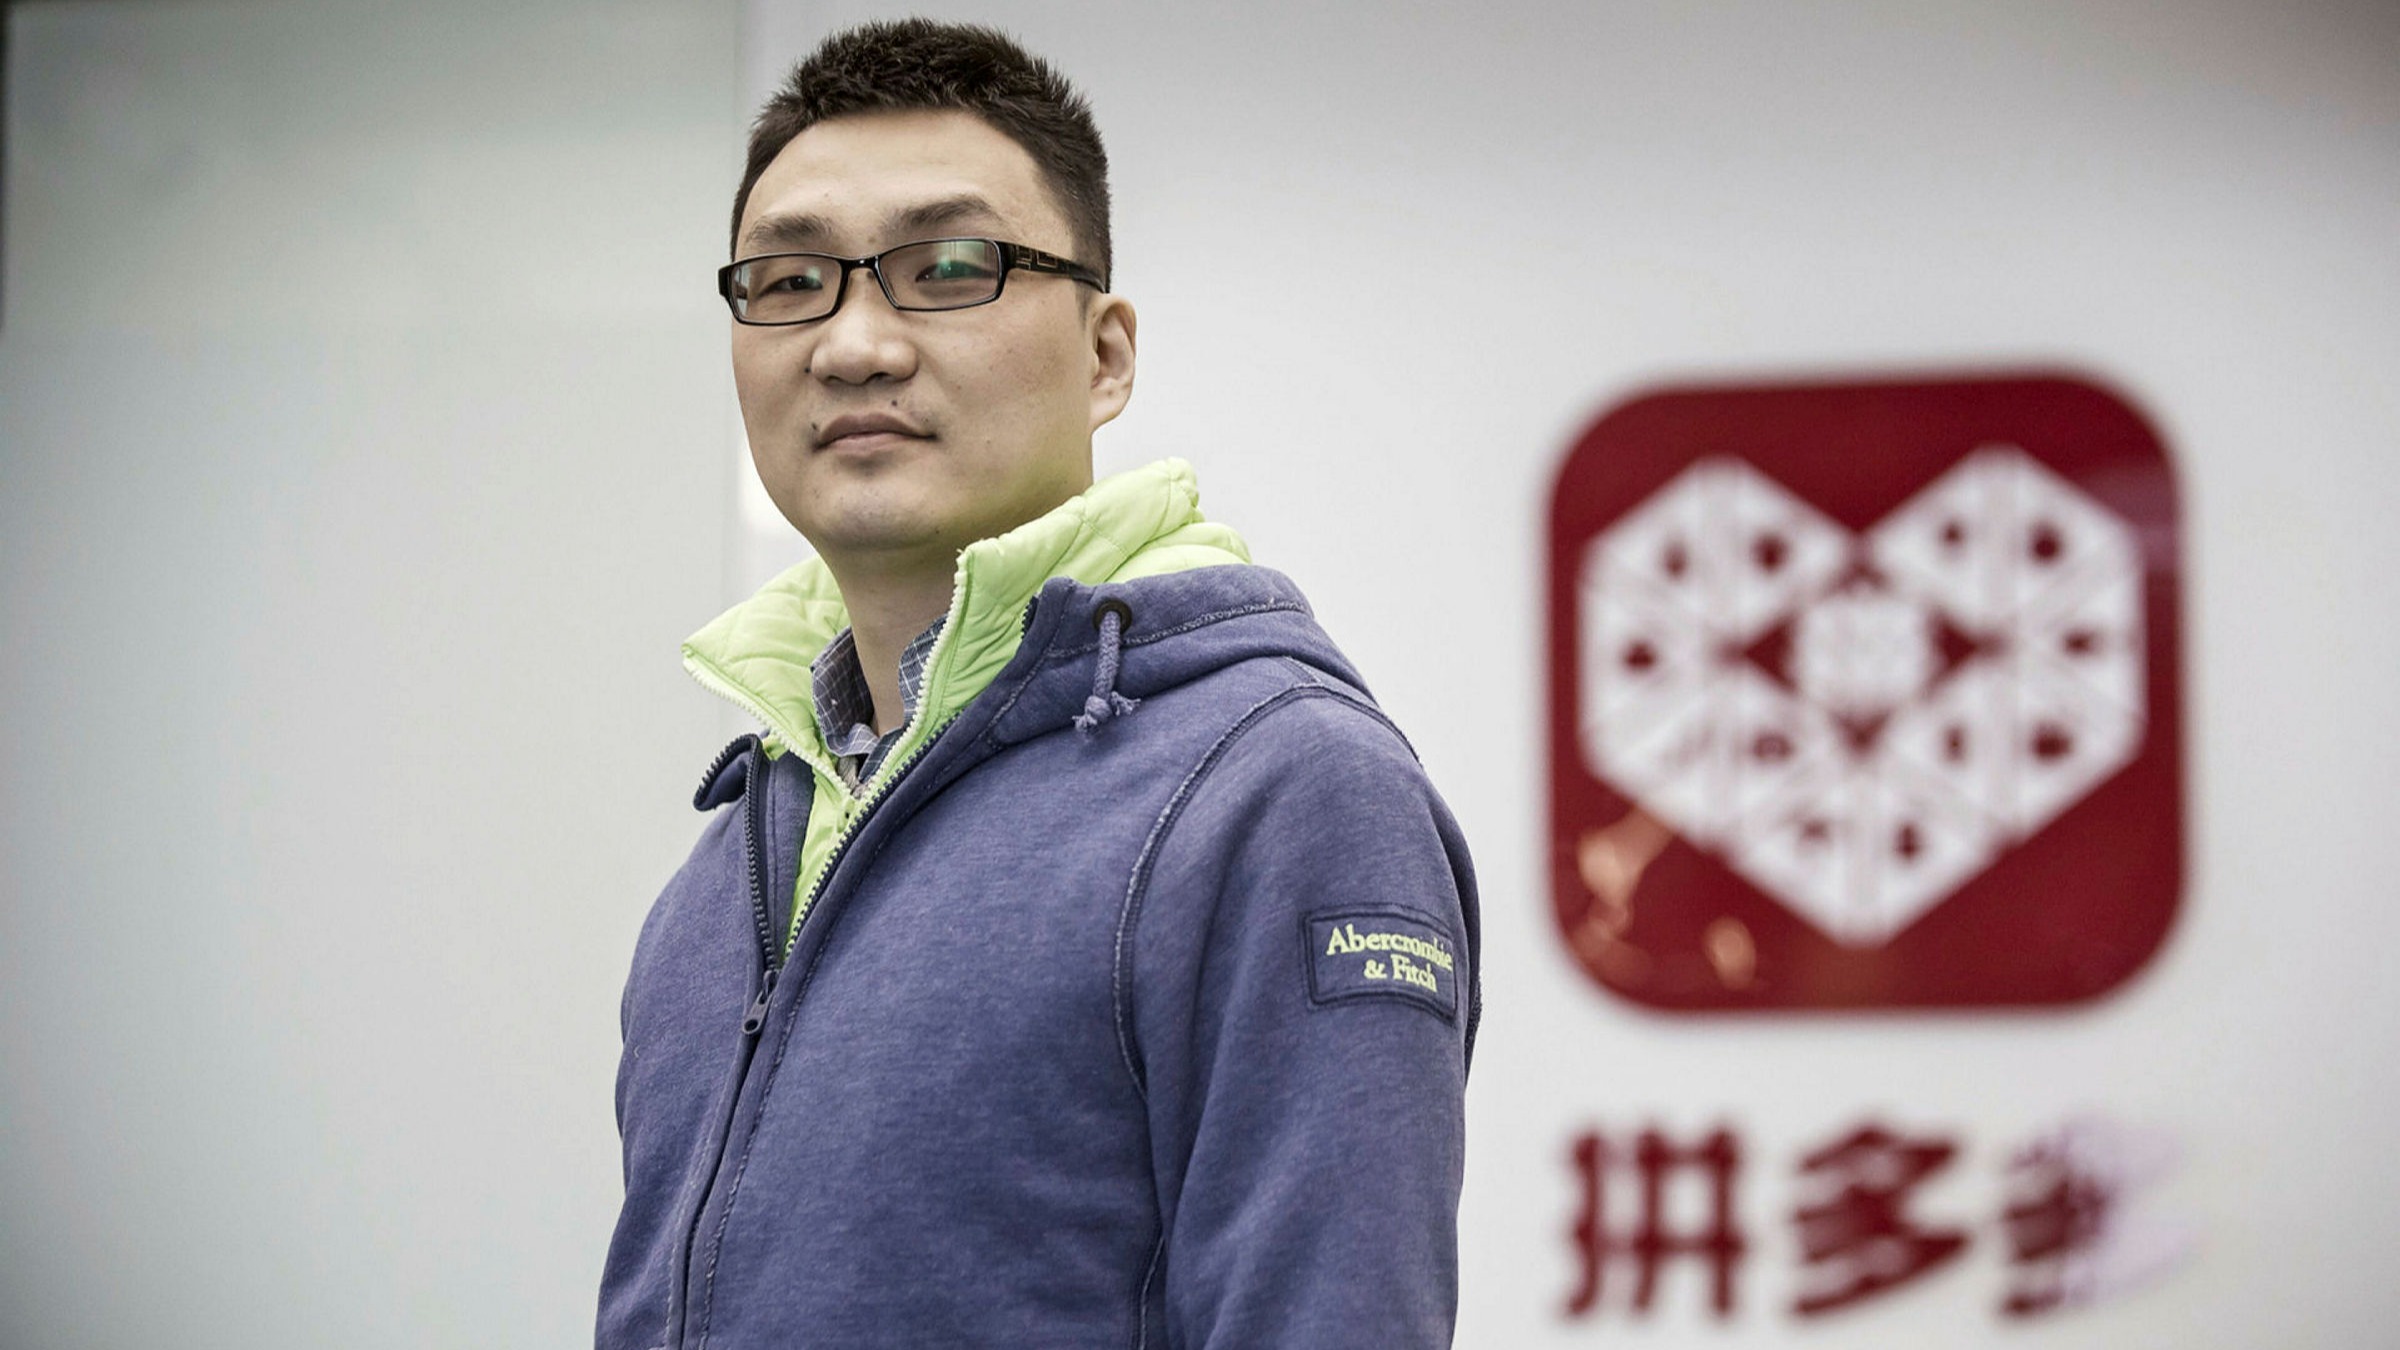 Pinduoduo Inc's Colin Huang's fortune has dropped by over $27 billion